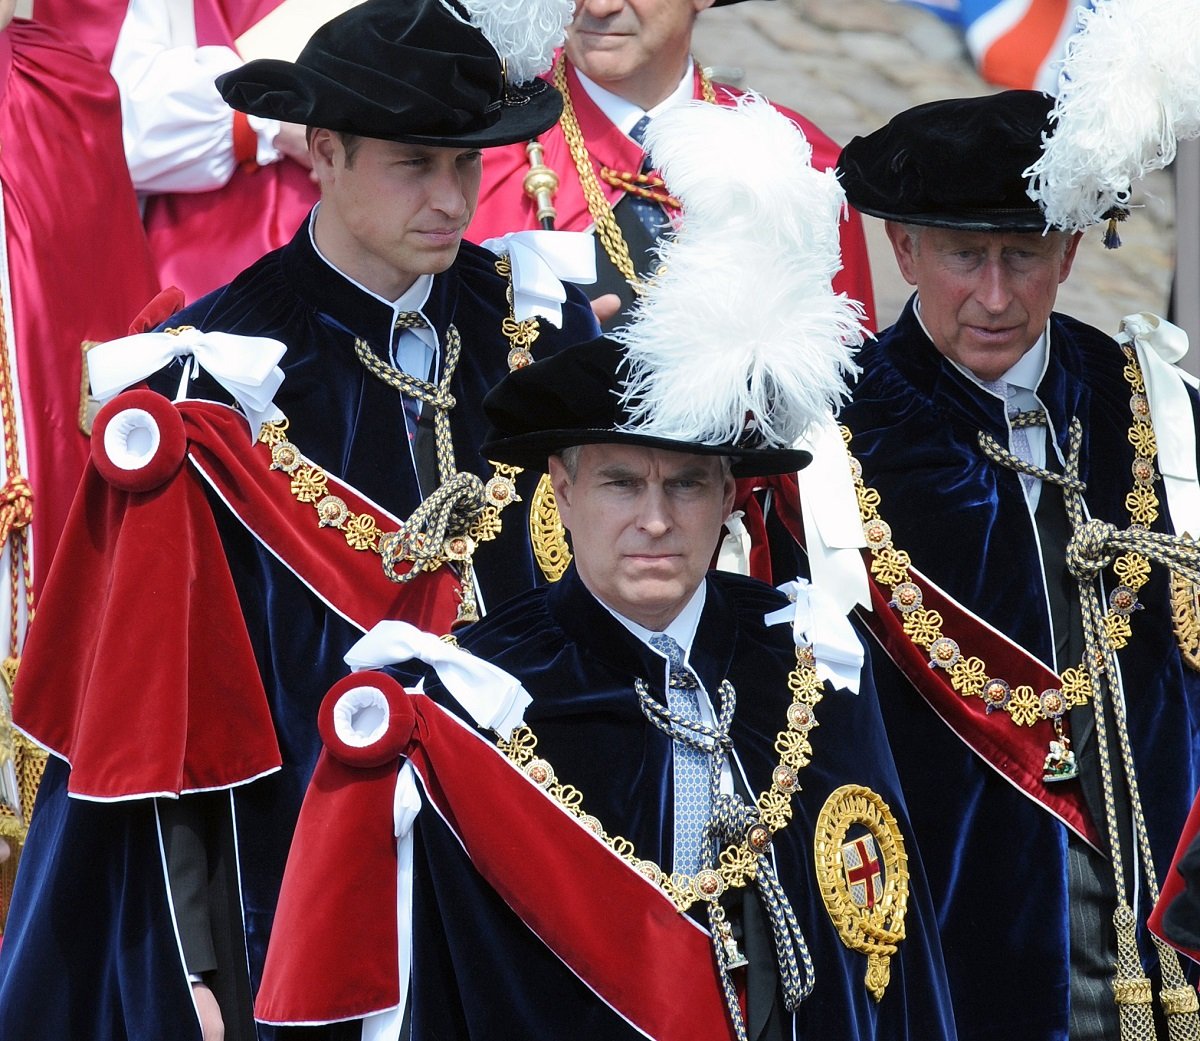 Prince William, Prince Andrew, and Prince Charles attend the Order of the Garter ceremony